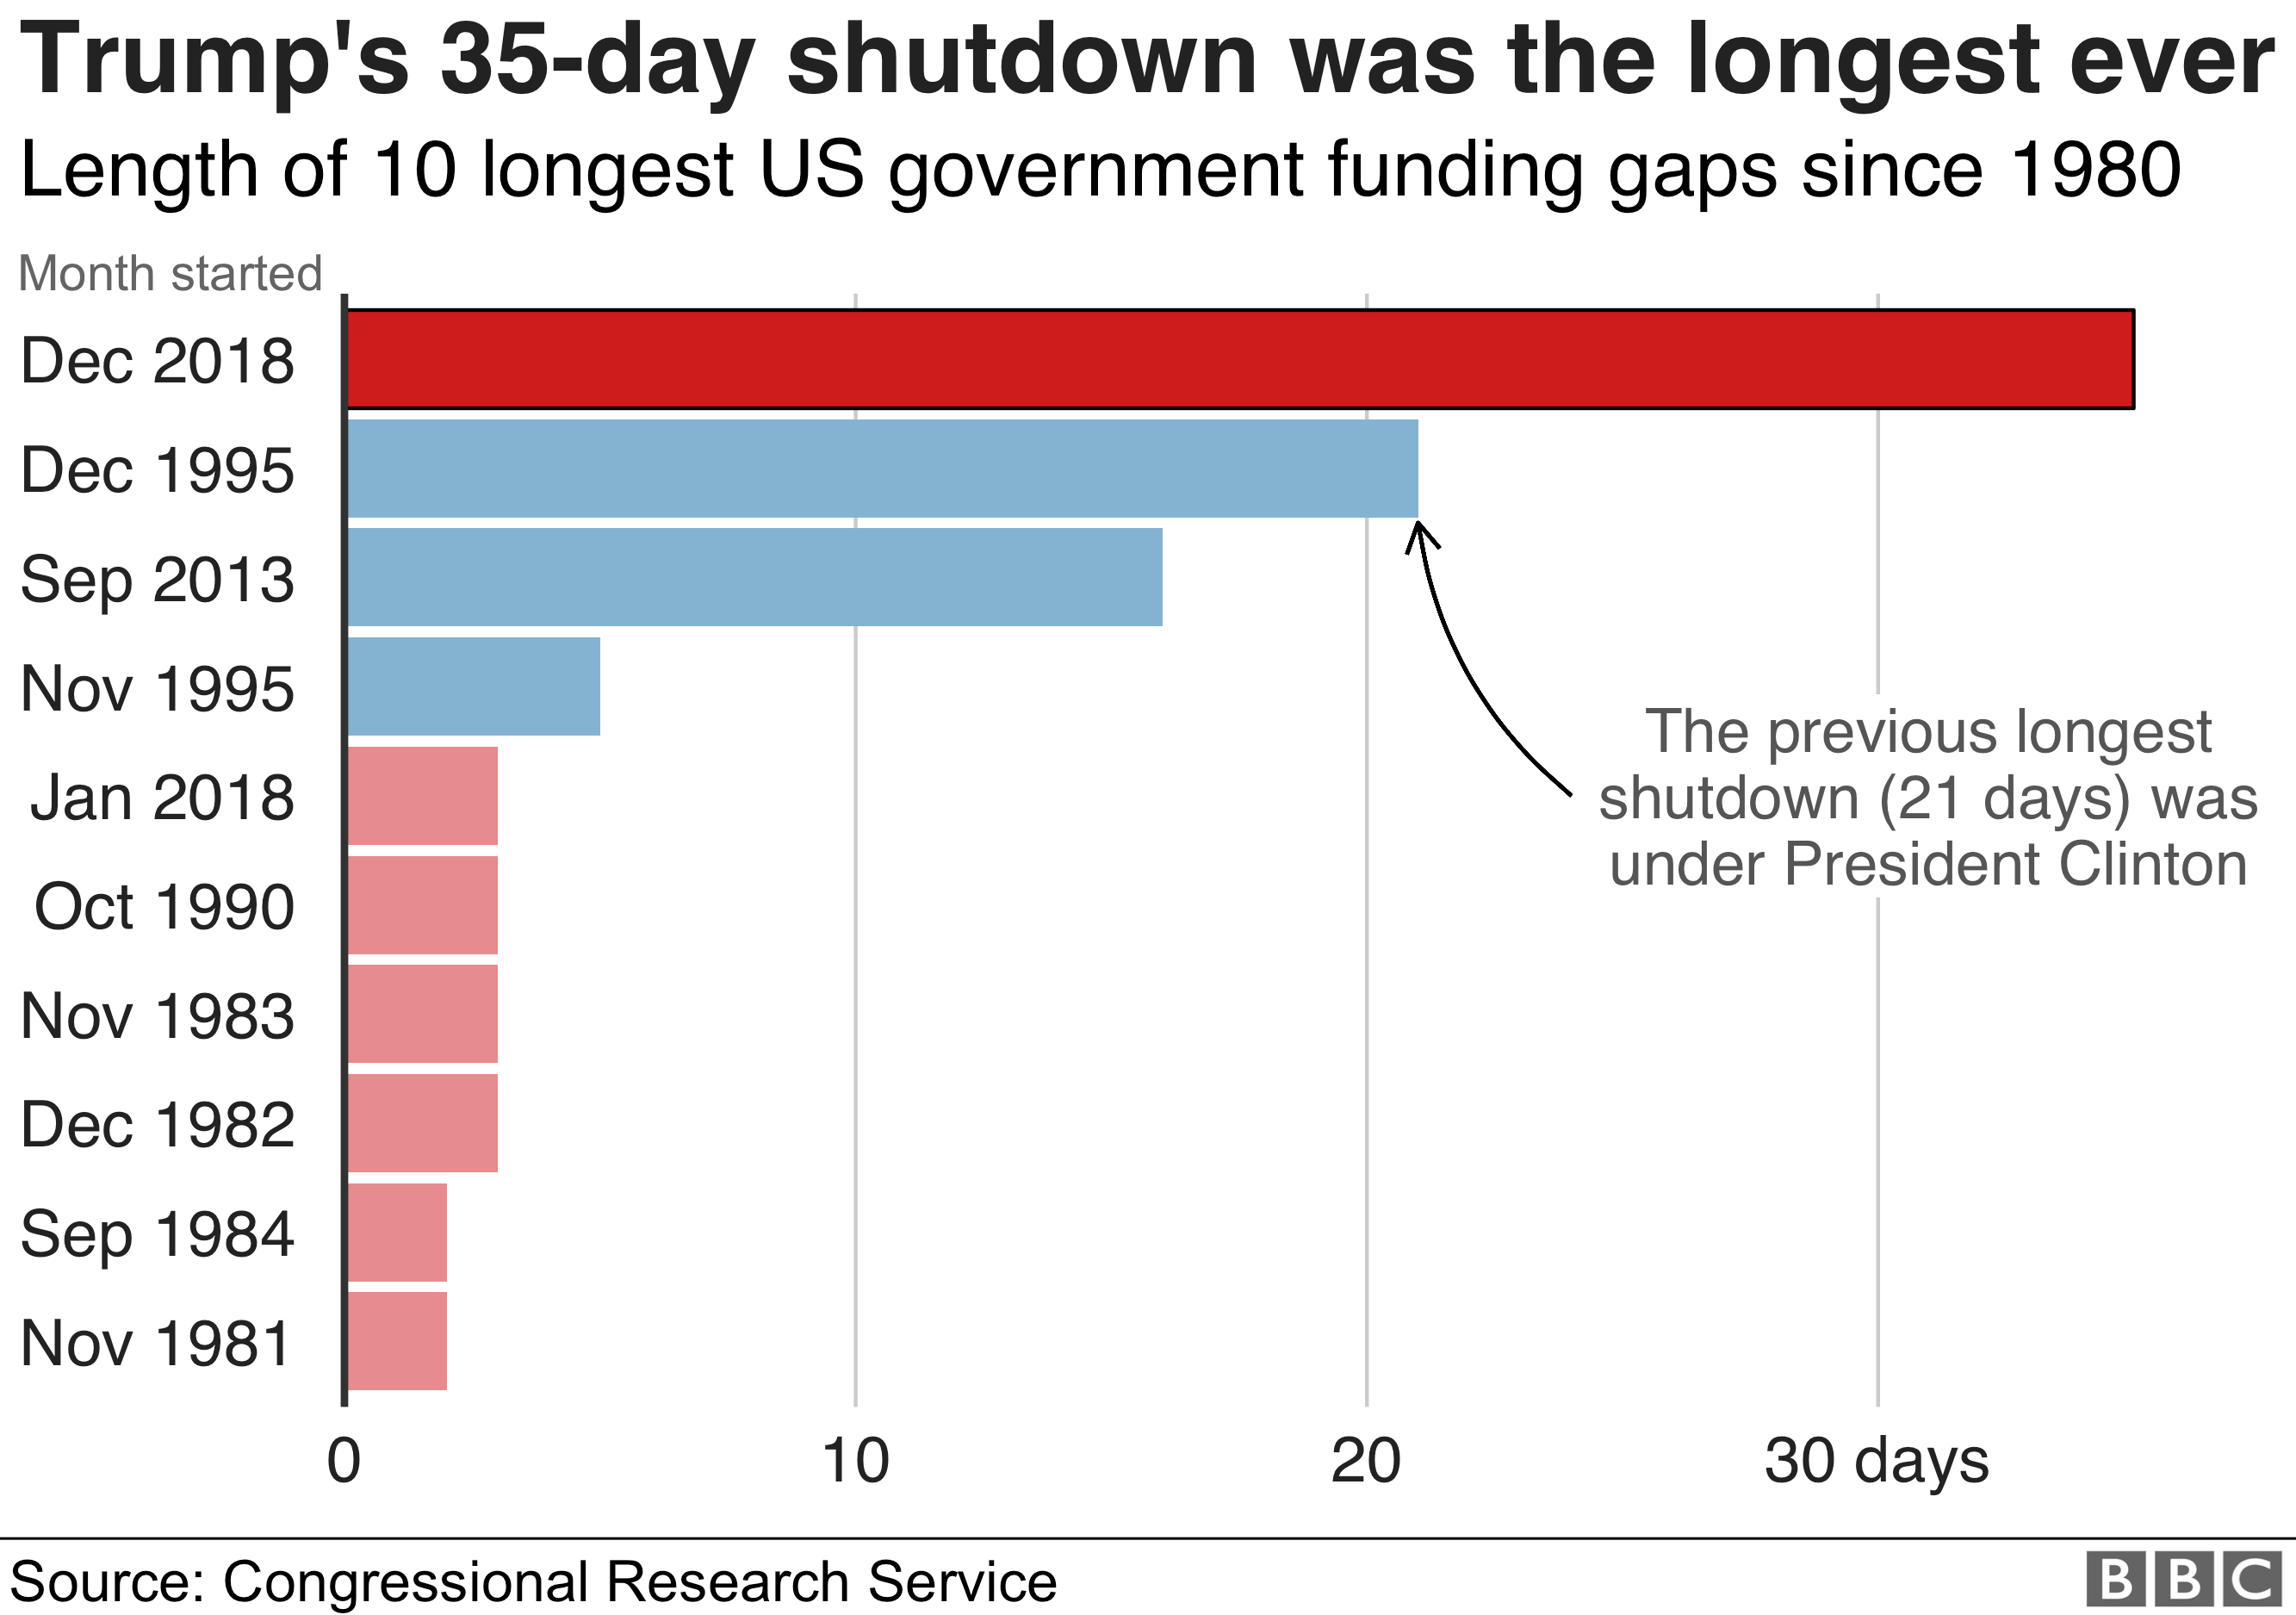 Chart showing how Trump's 35-day shutdown over funding for his border wall was the longest ever gap in government funding